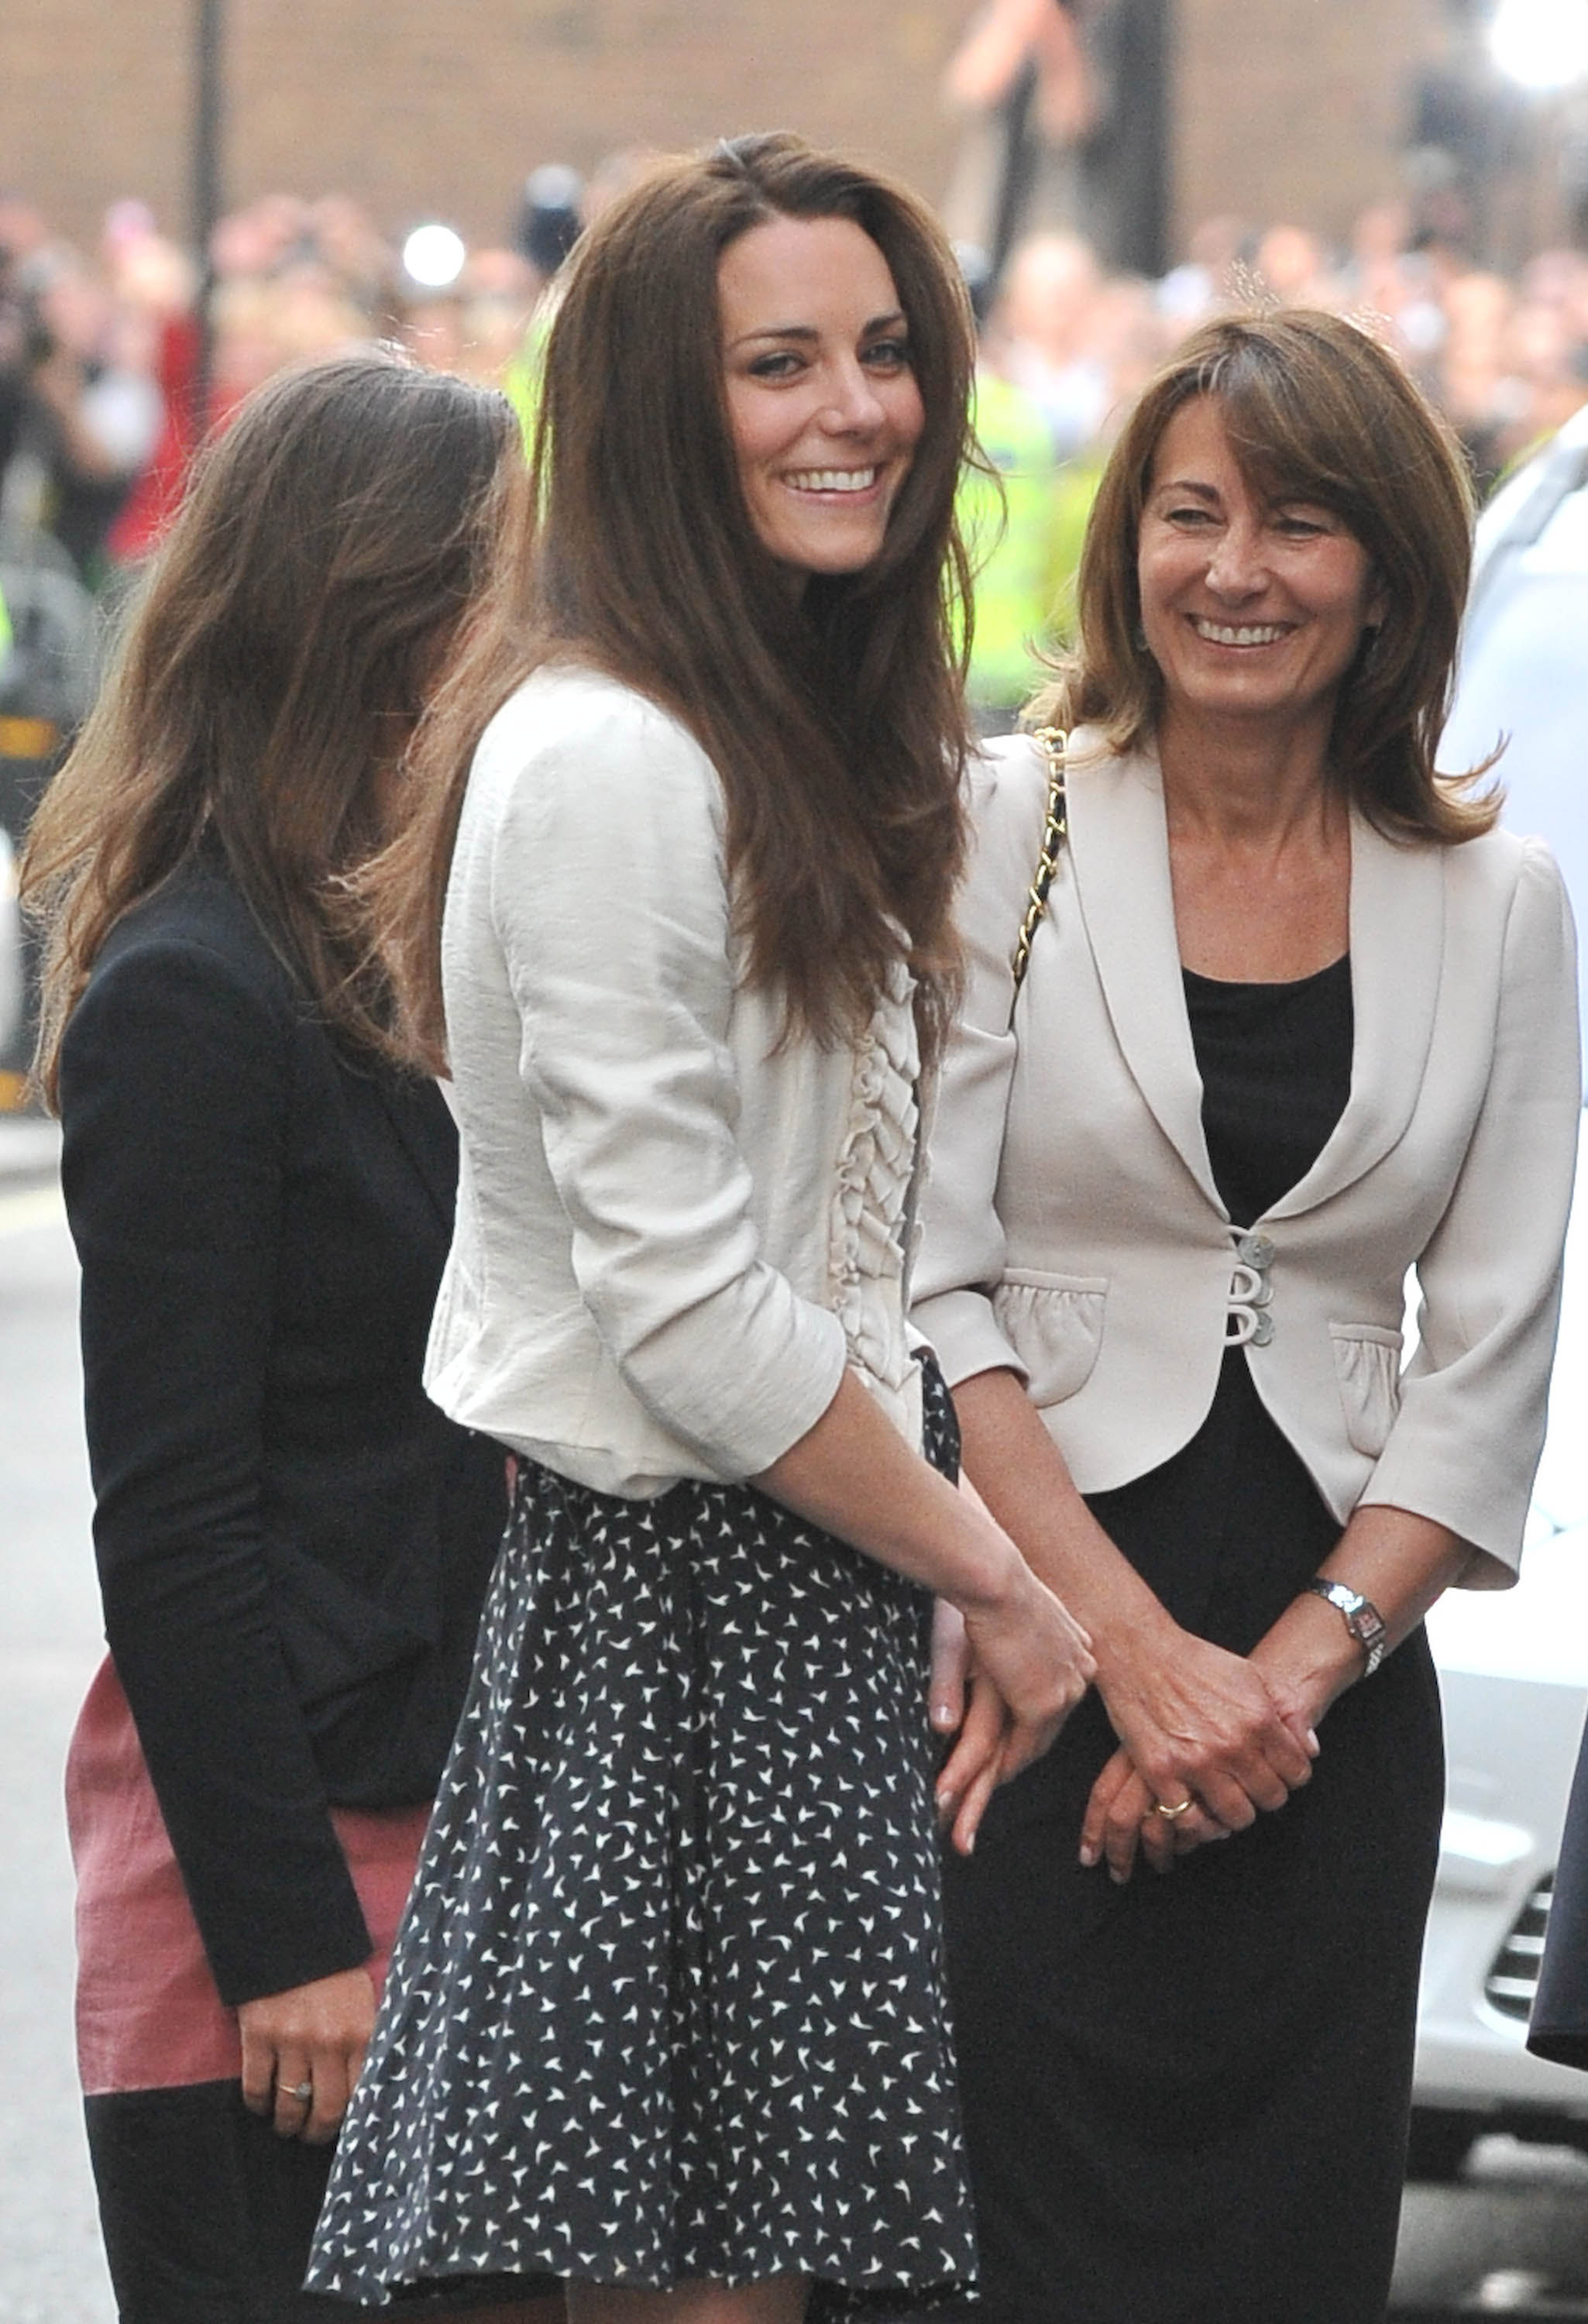 Pippa, Kate and Carole Middleton at the Goring Hotel in London, England on April 28, 2011 | Source: Getty Images